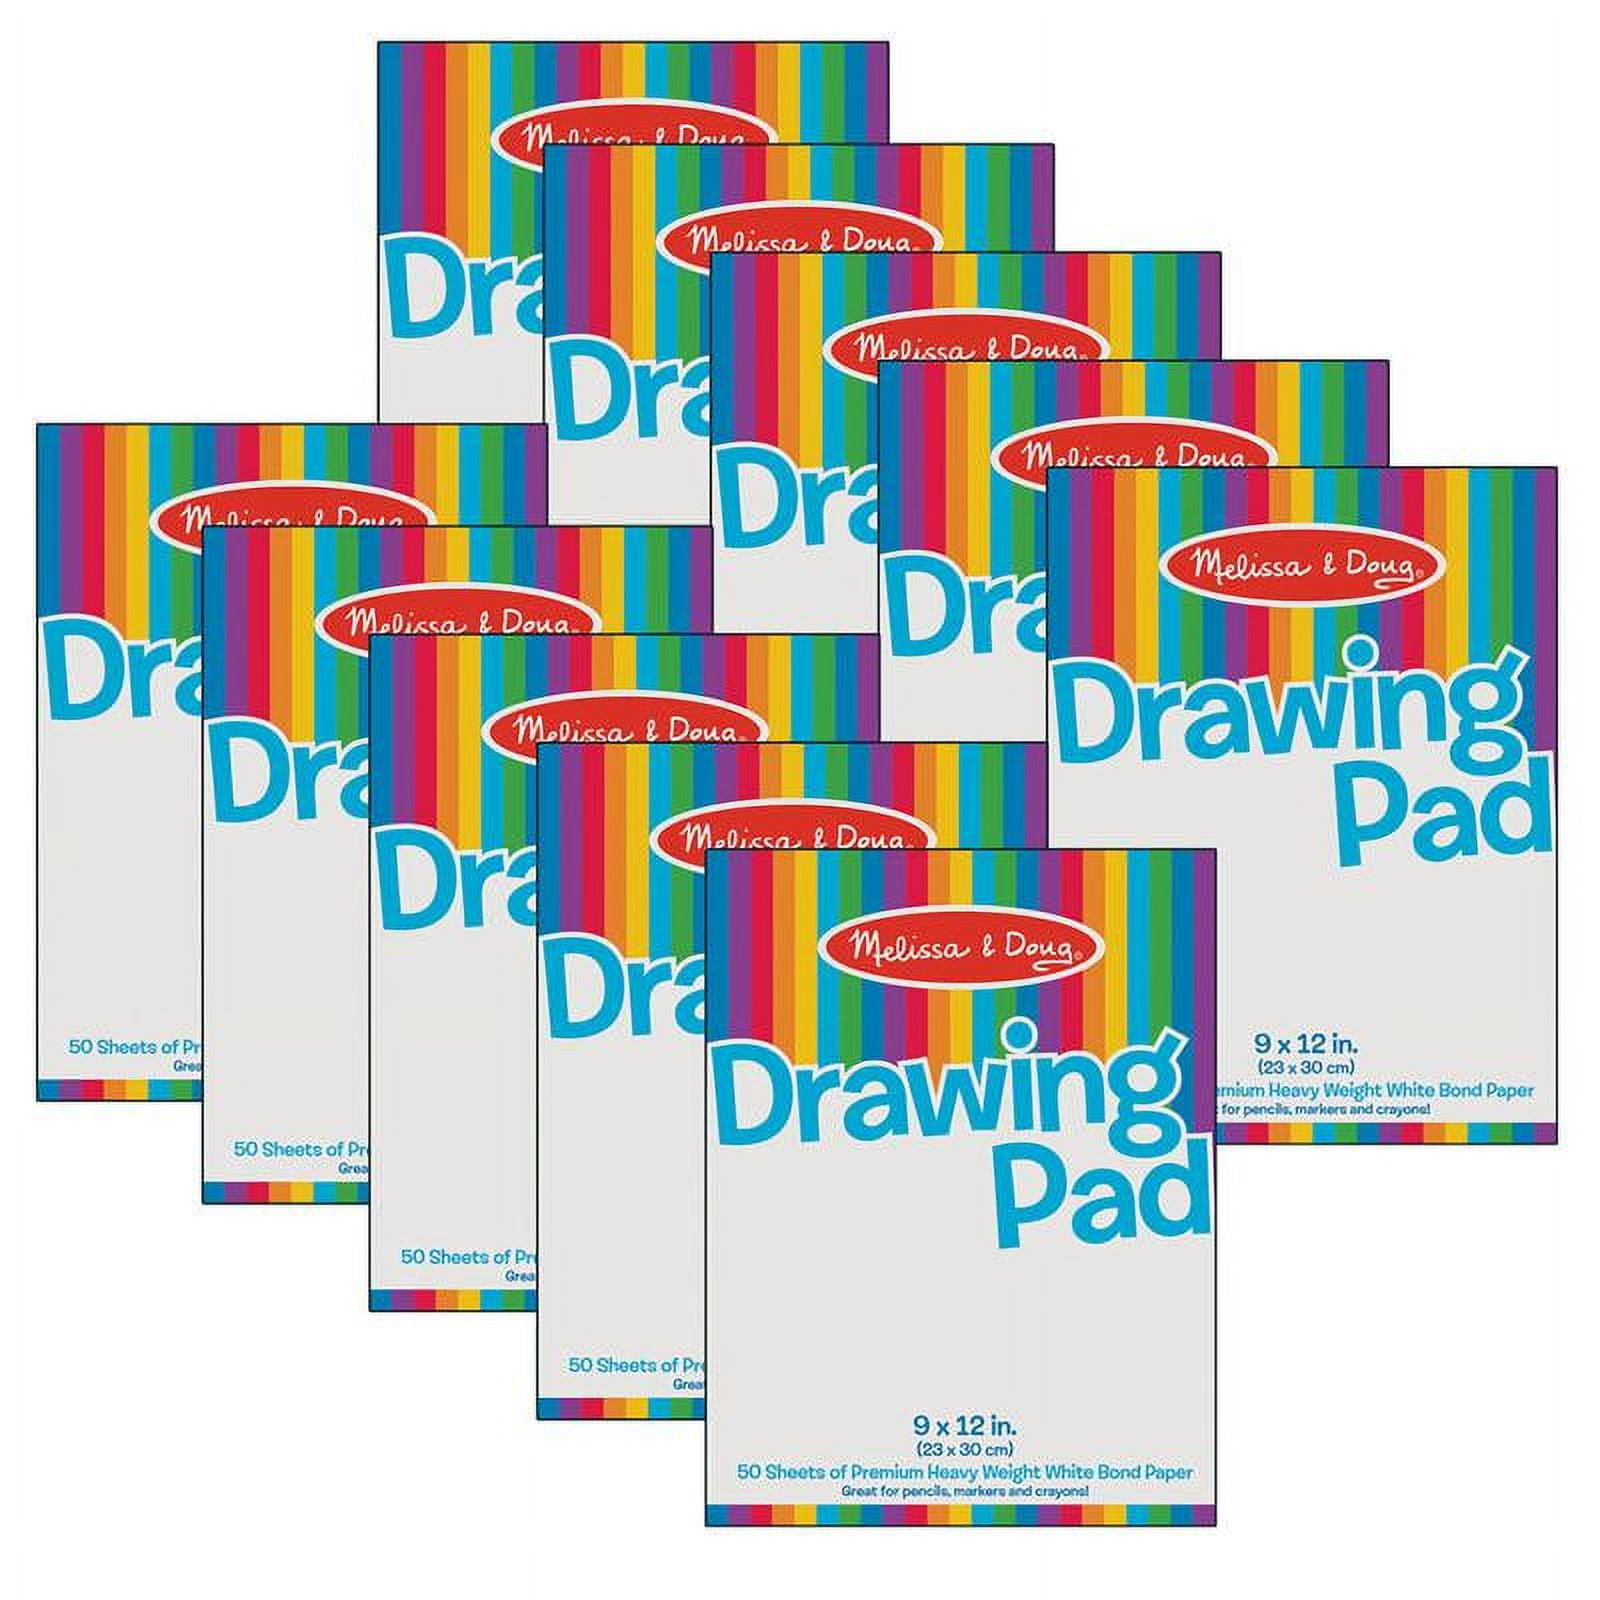 Melissa & Doug Drawing Pad, 9 x 12, White, 50 Sheets, Pack of 10